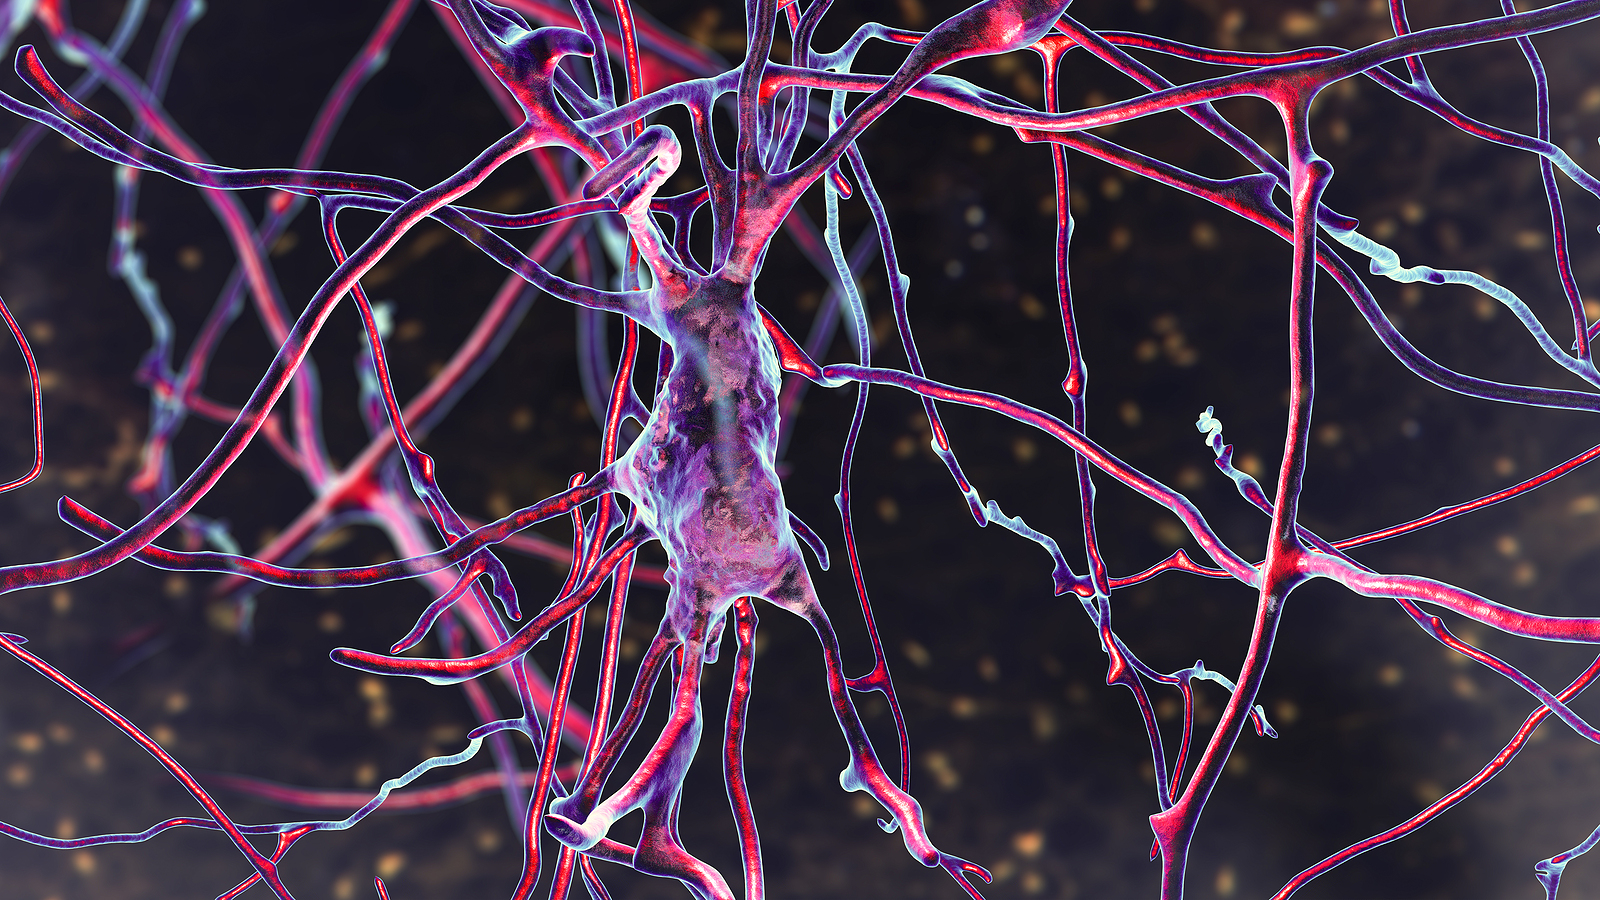 Images of brain neurons in shades of purple and red